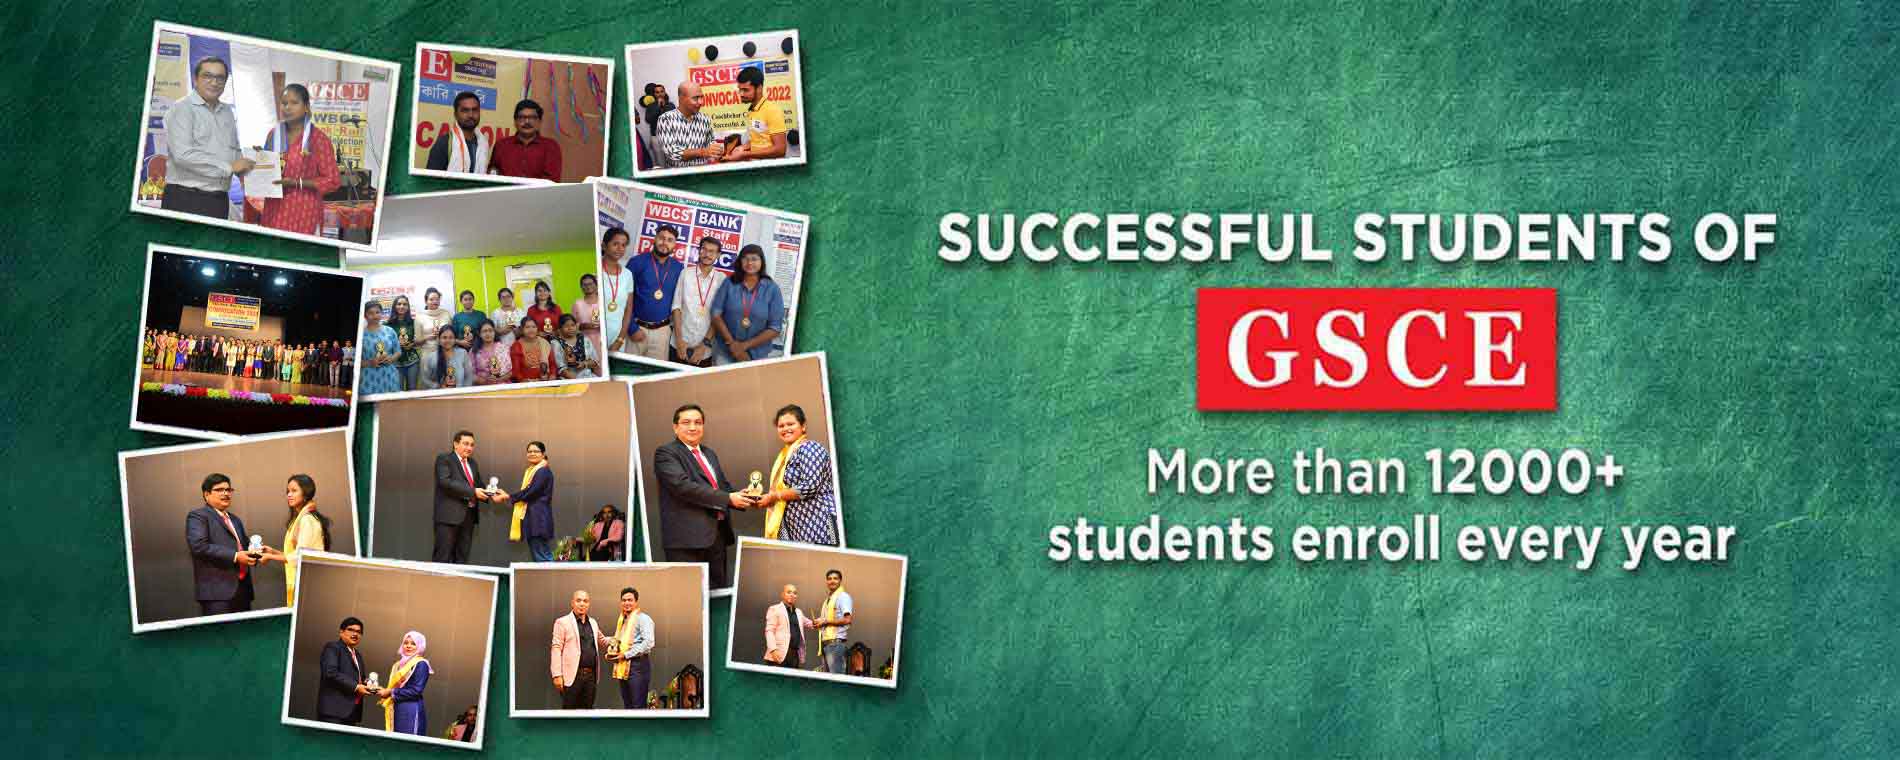 successful students of gsce more than 12000+ students enroll every year